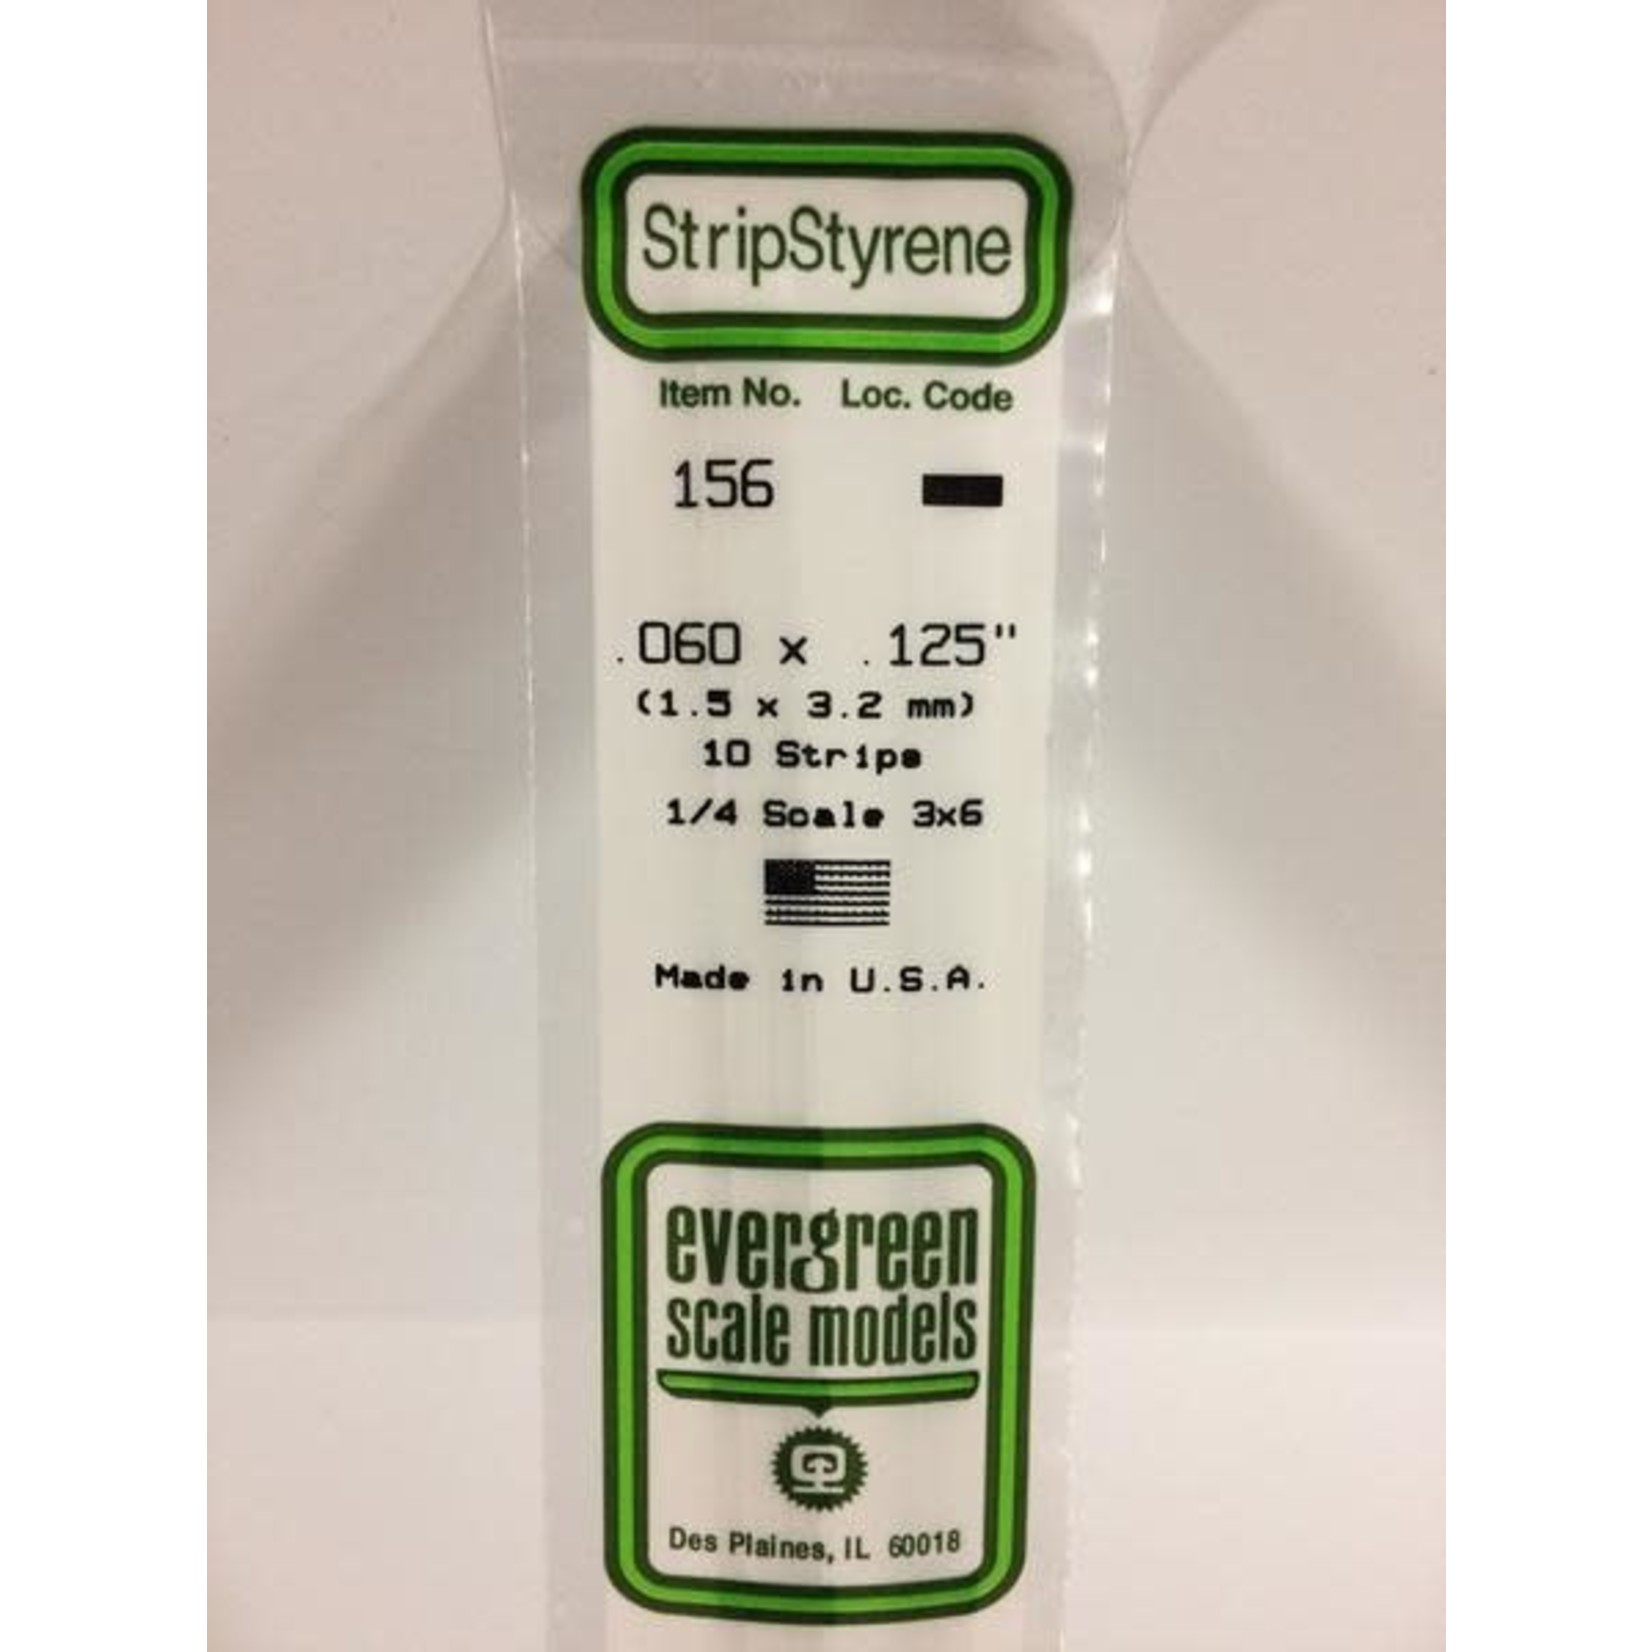 Evergreen Scale Models Evergreen 156 - .060" X .125" OPAQUE WHITE POLYSTYRENE STRIP